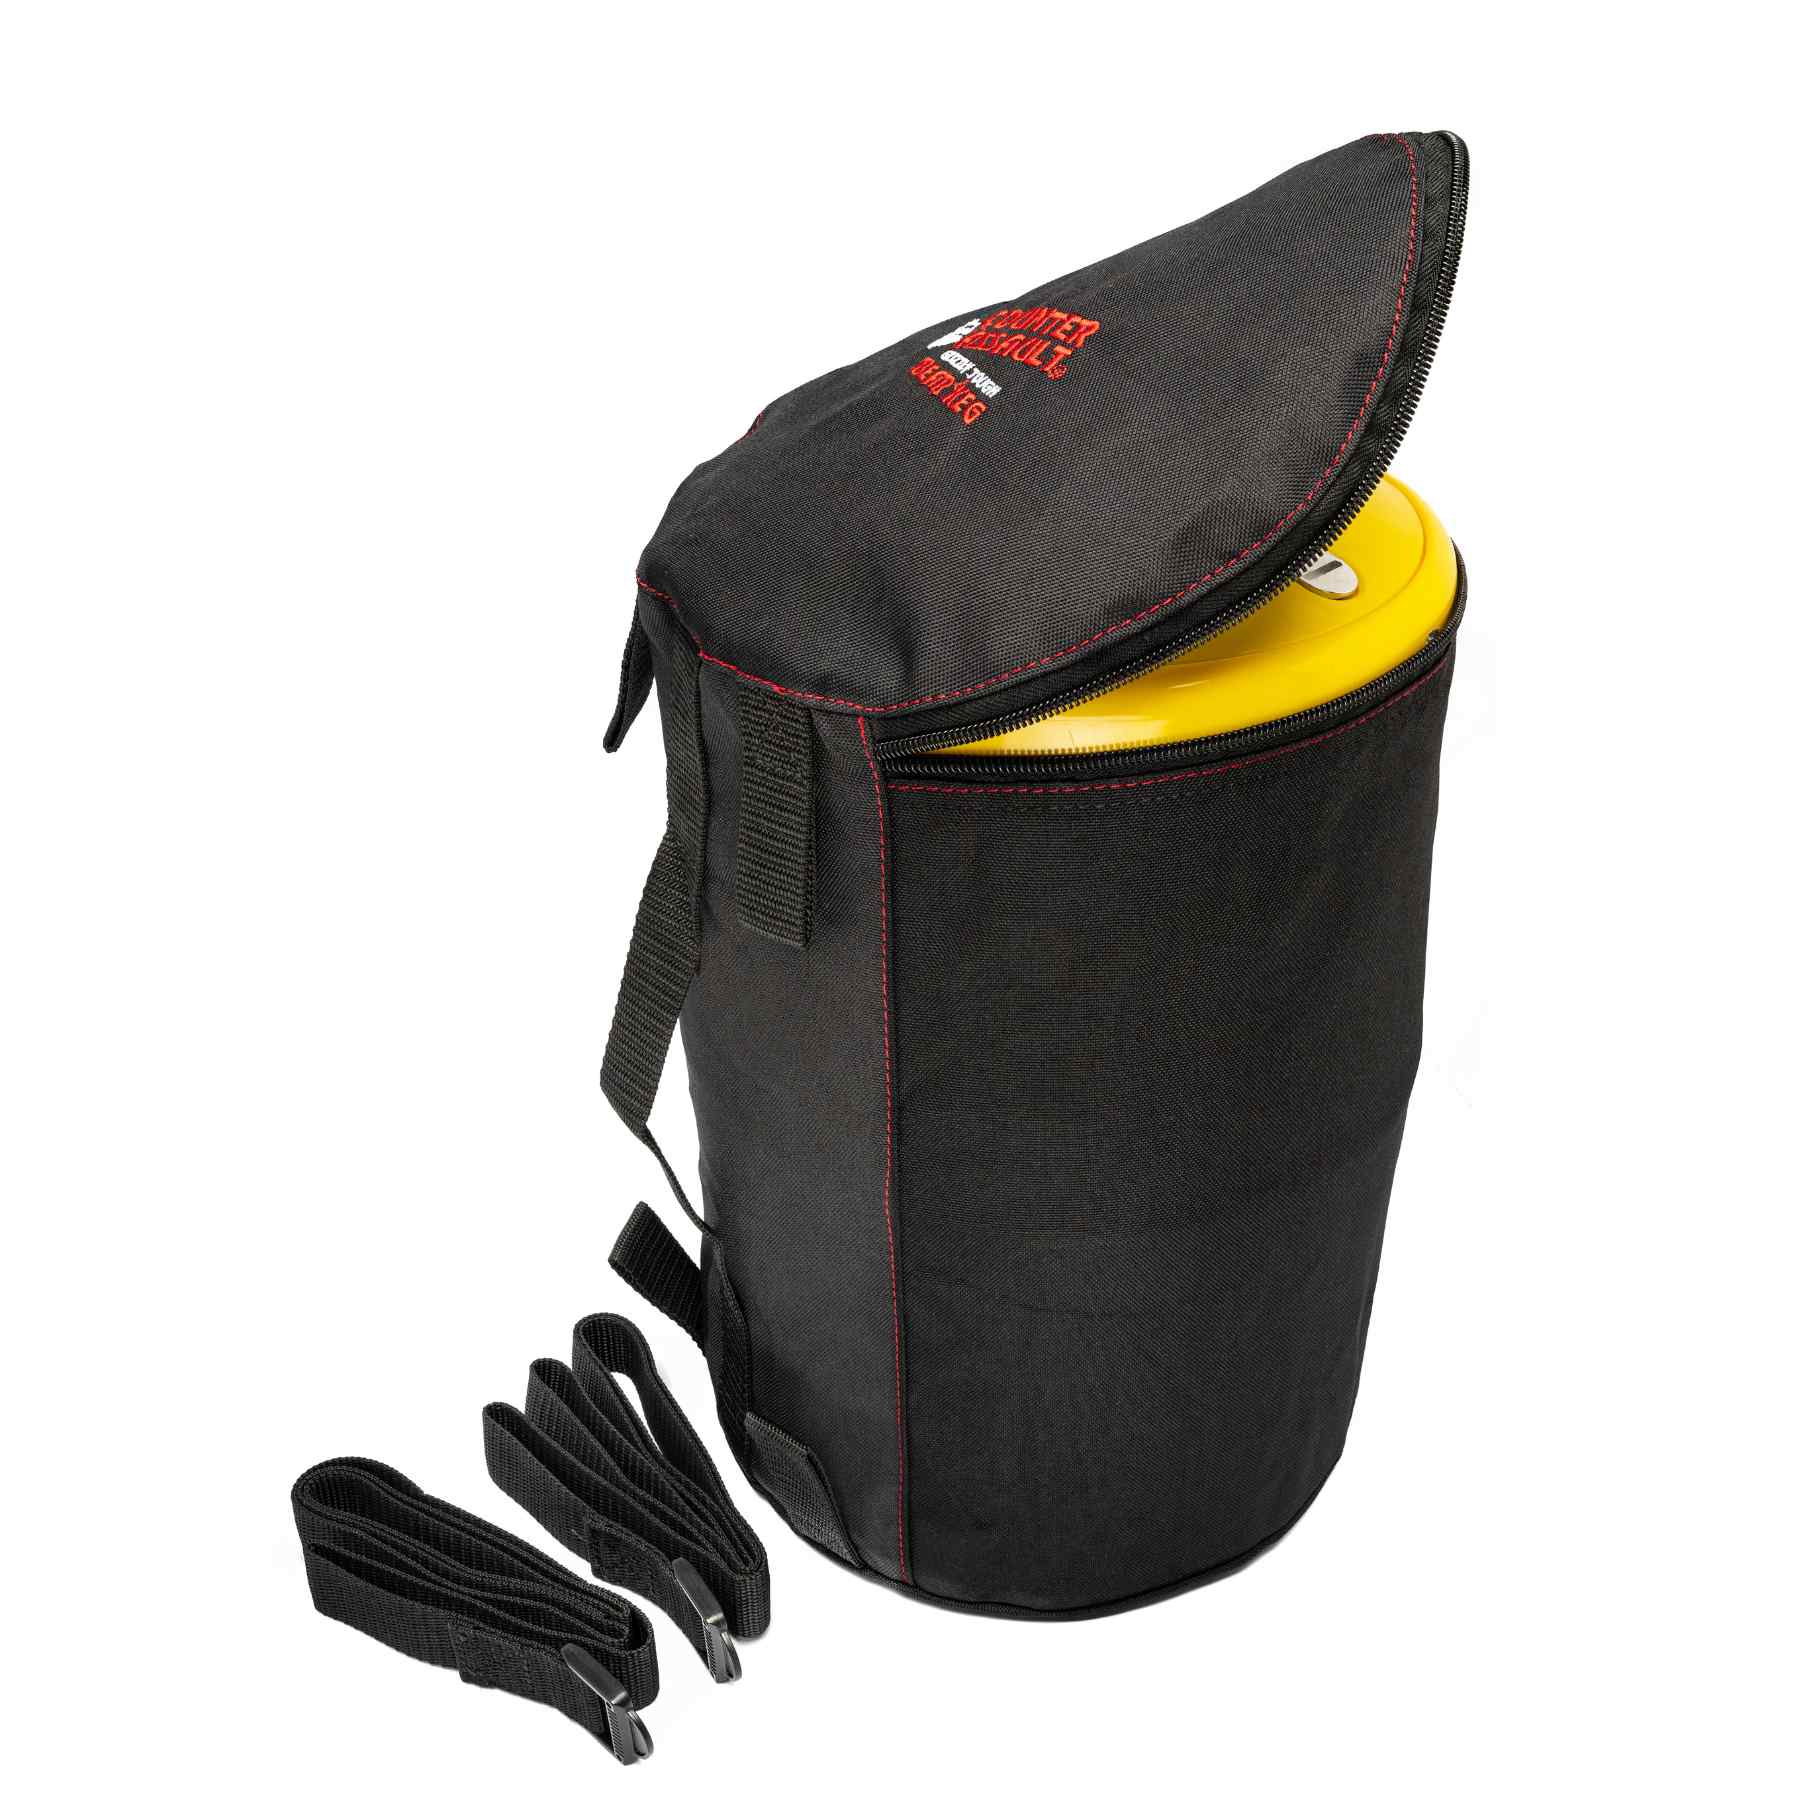 Bear keg carrying case with straps